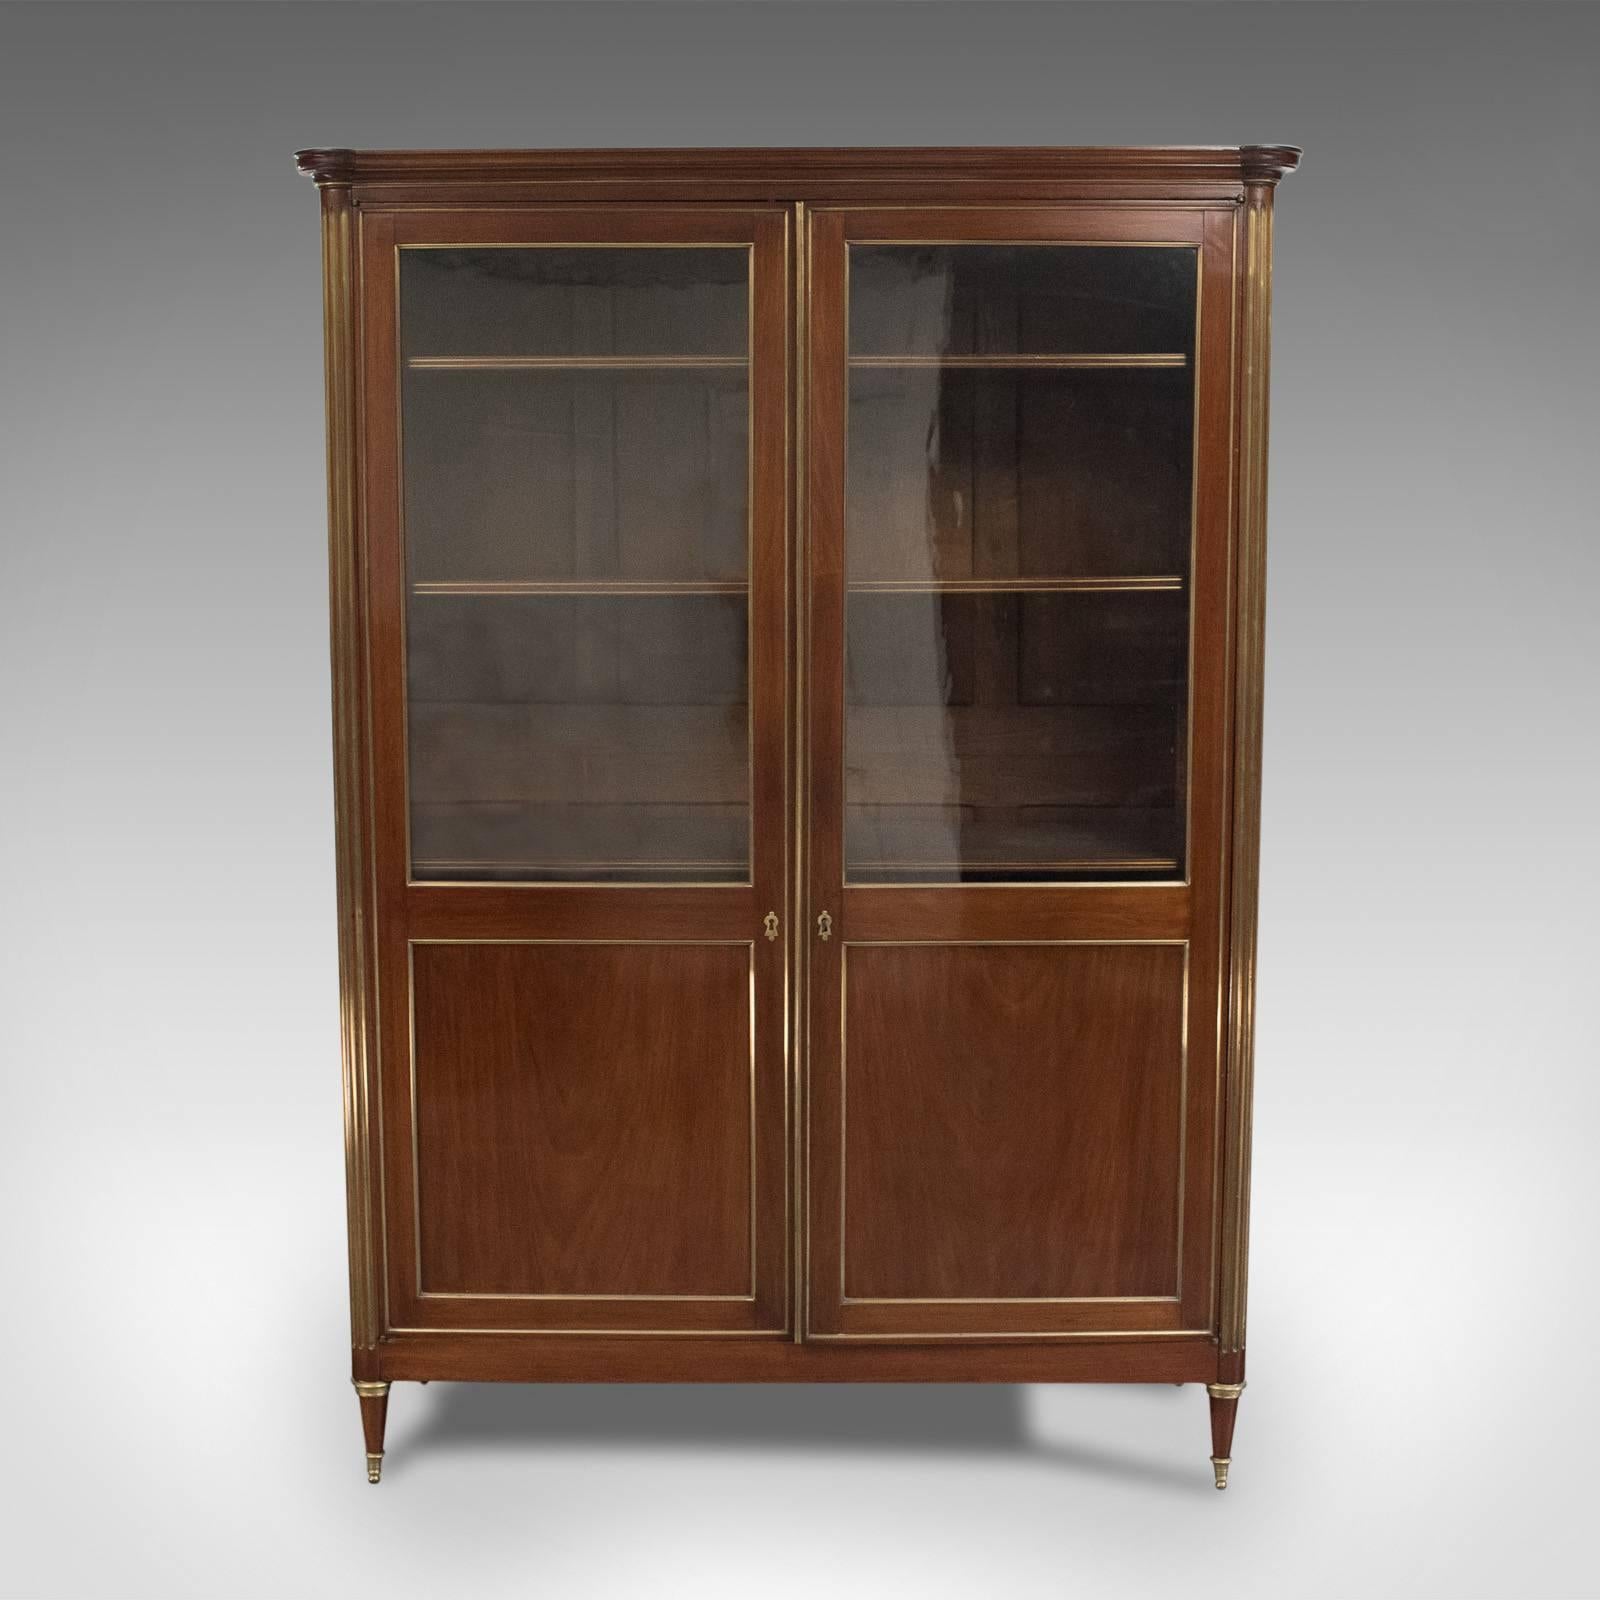 This is a 19th century, French, Louis XVI revival, two-door bookcase, vitrine or cabinet dating to circa 1880.

Hand built to the highest level of craftsmanship
In mahogany with excellent colour and finish
Accentuated with bronzed beading and